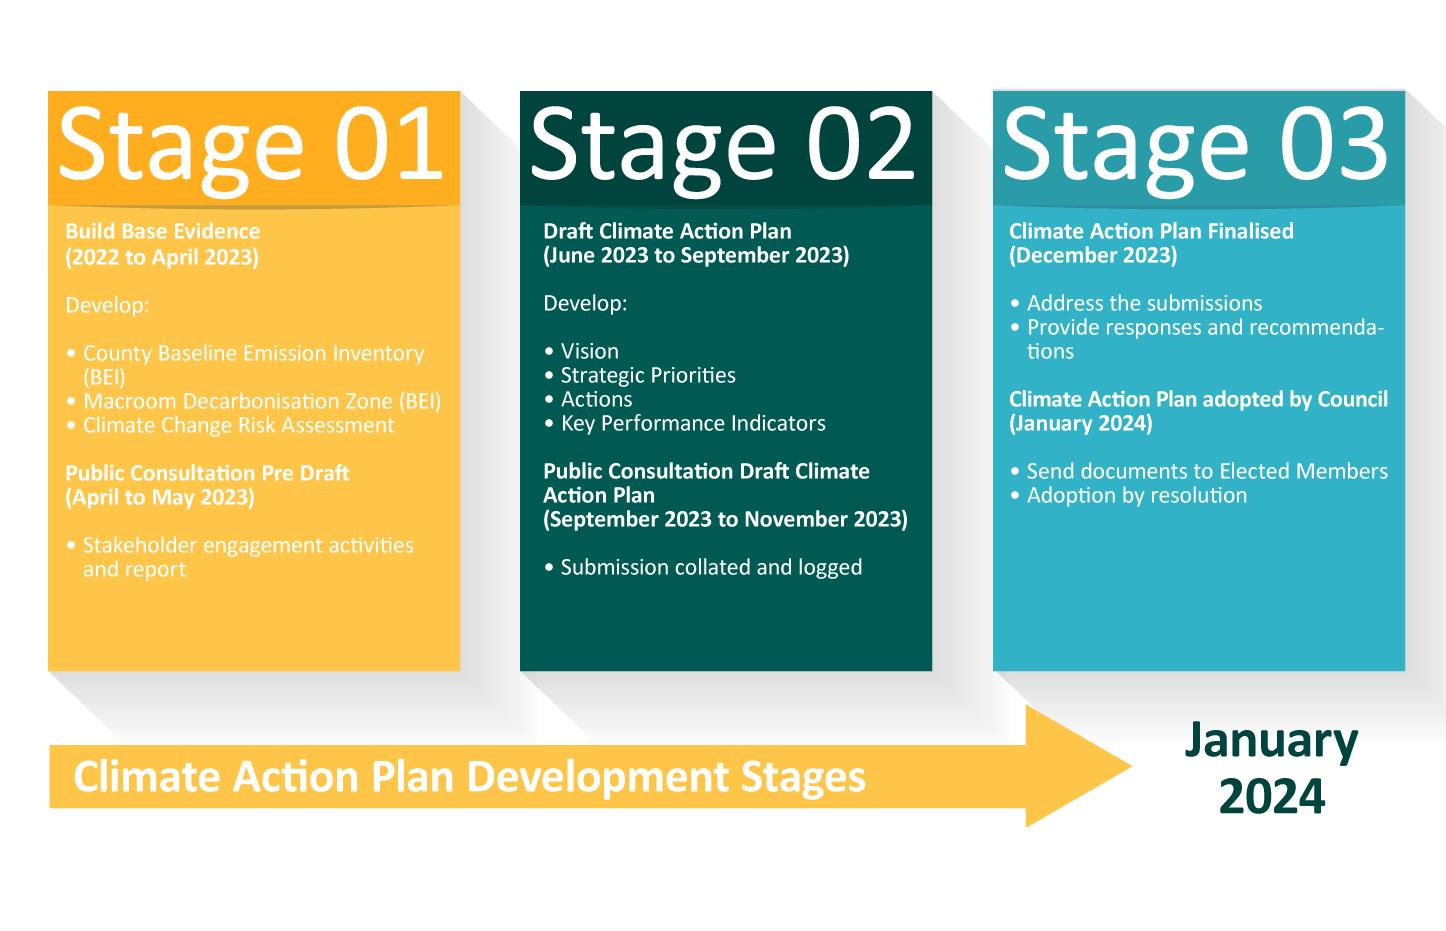 Climate Action Plan Development Stages Infographic